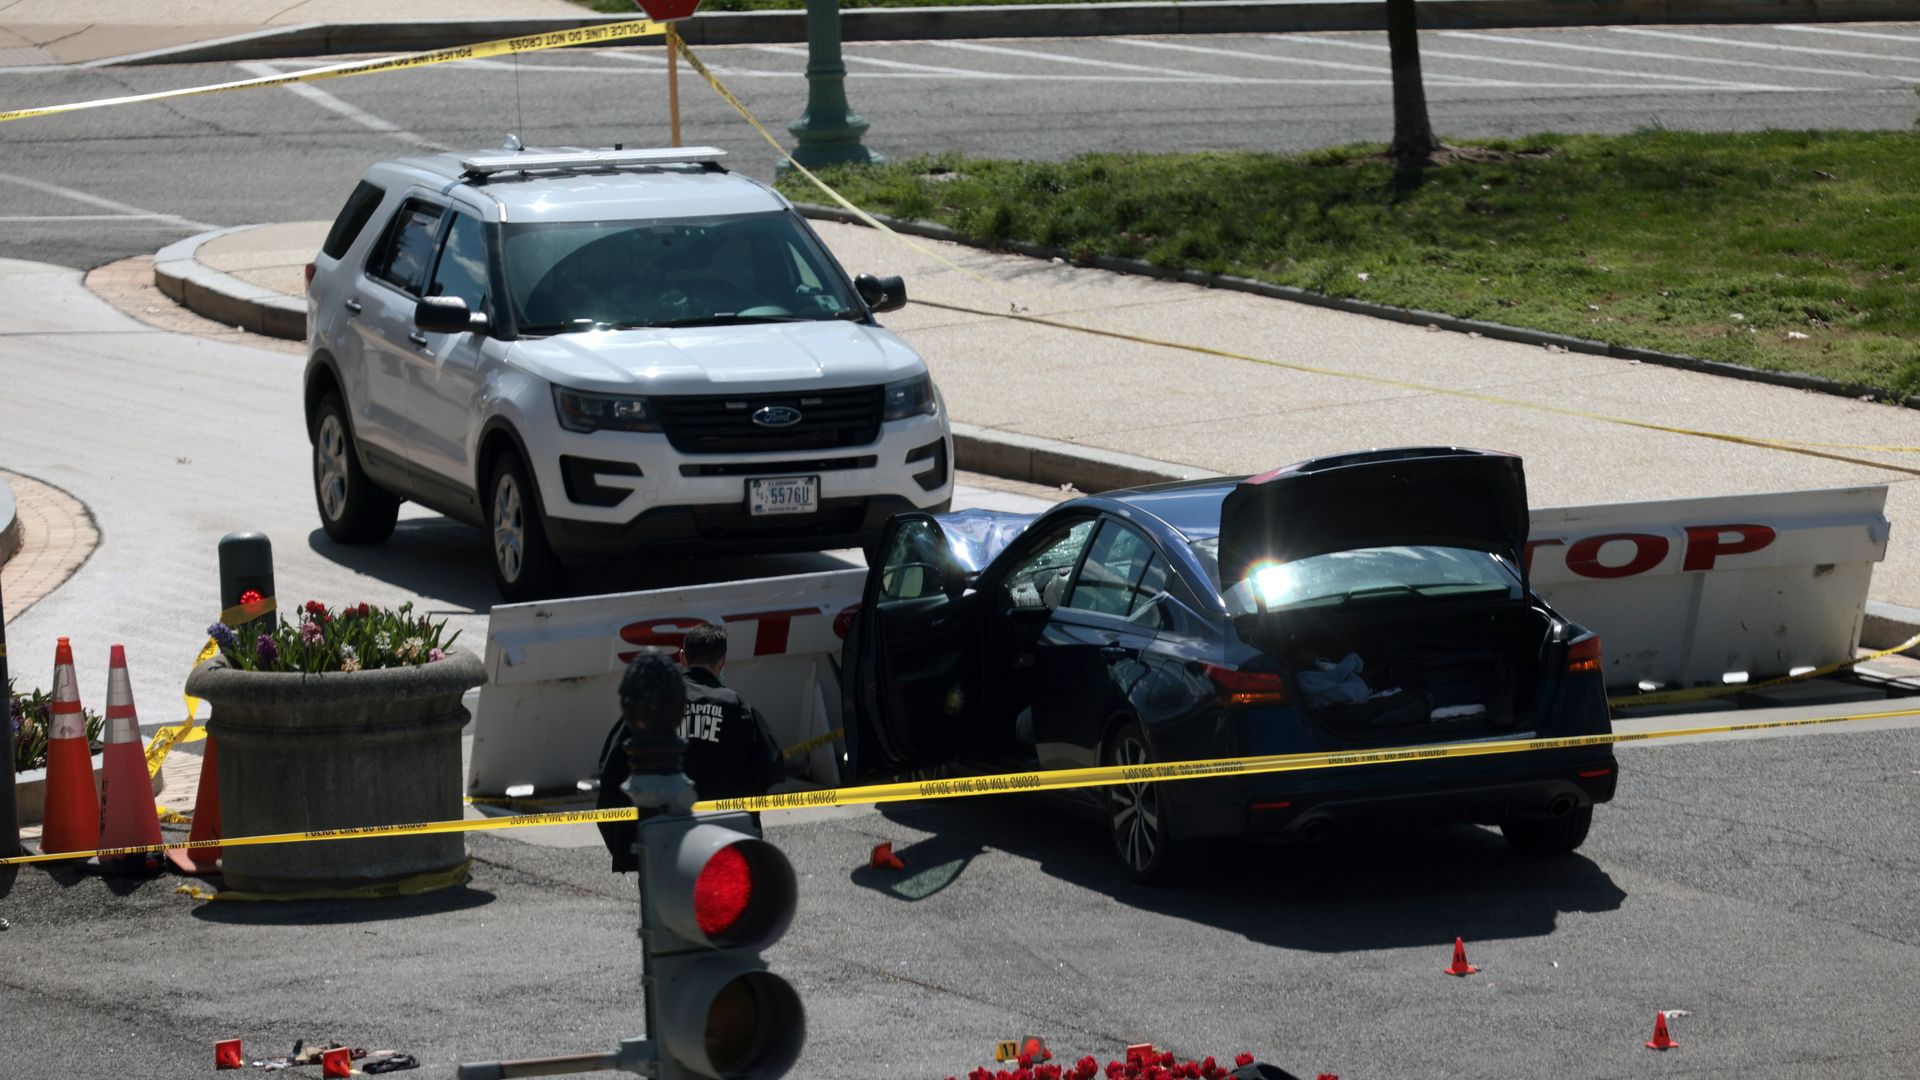 Police investigating the scene where a driver rammed a vehicle into two police officers at the U.S. Capitol on April 02.